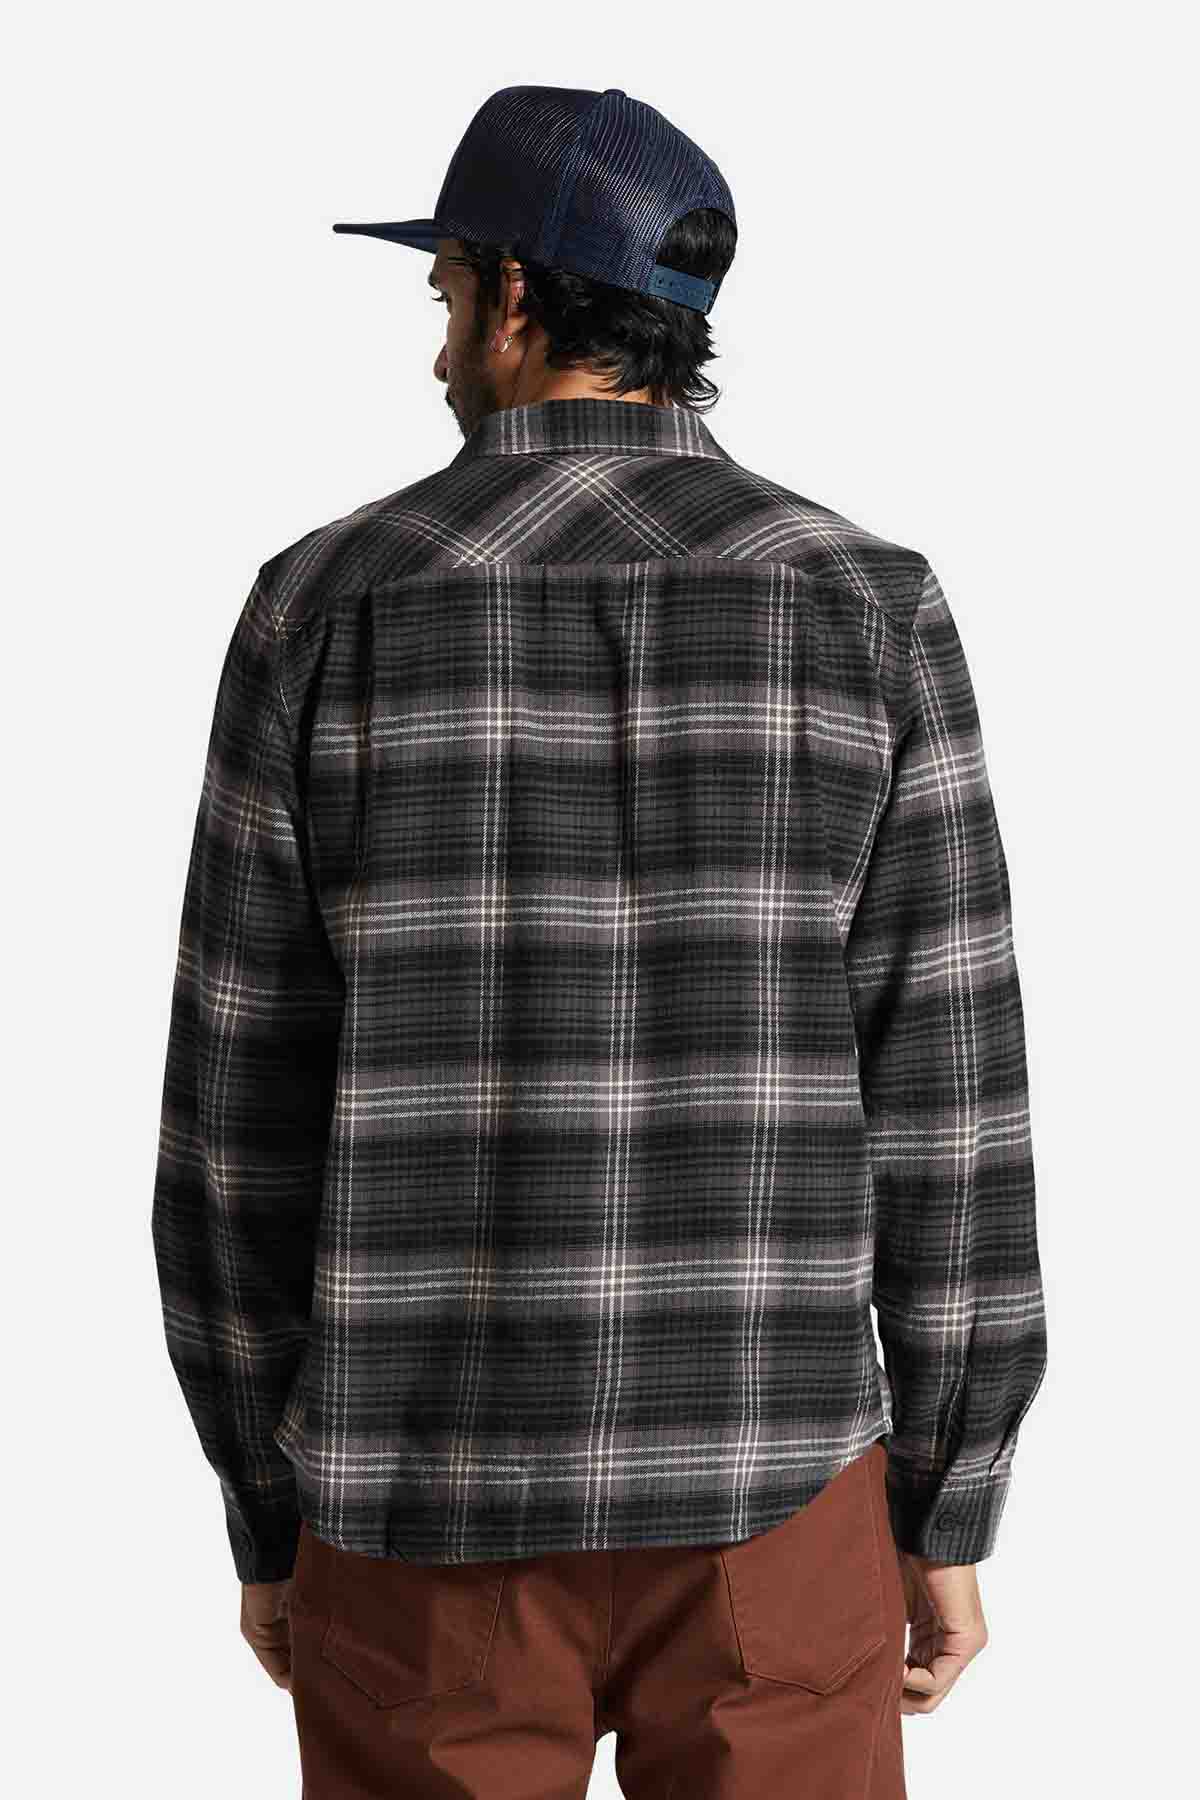 Brixton - Bowery LW Ultra Flannel - Charcoal/Black - Back